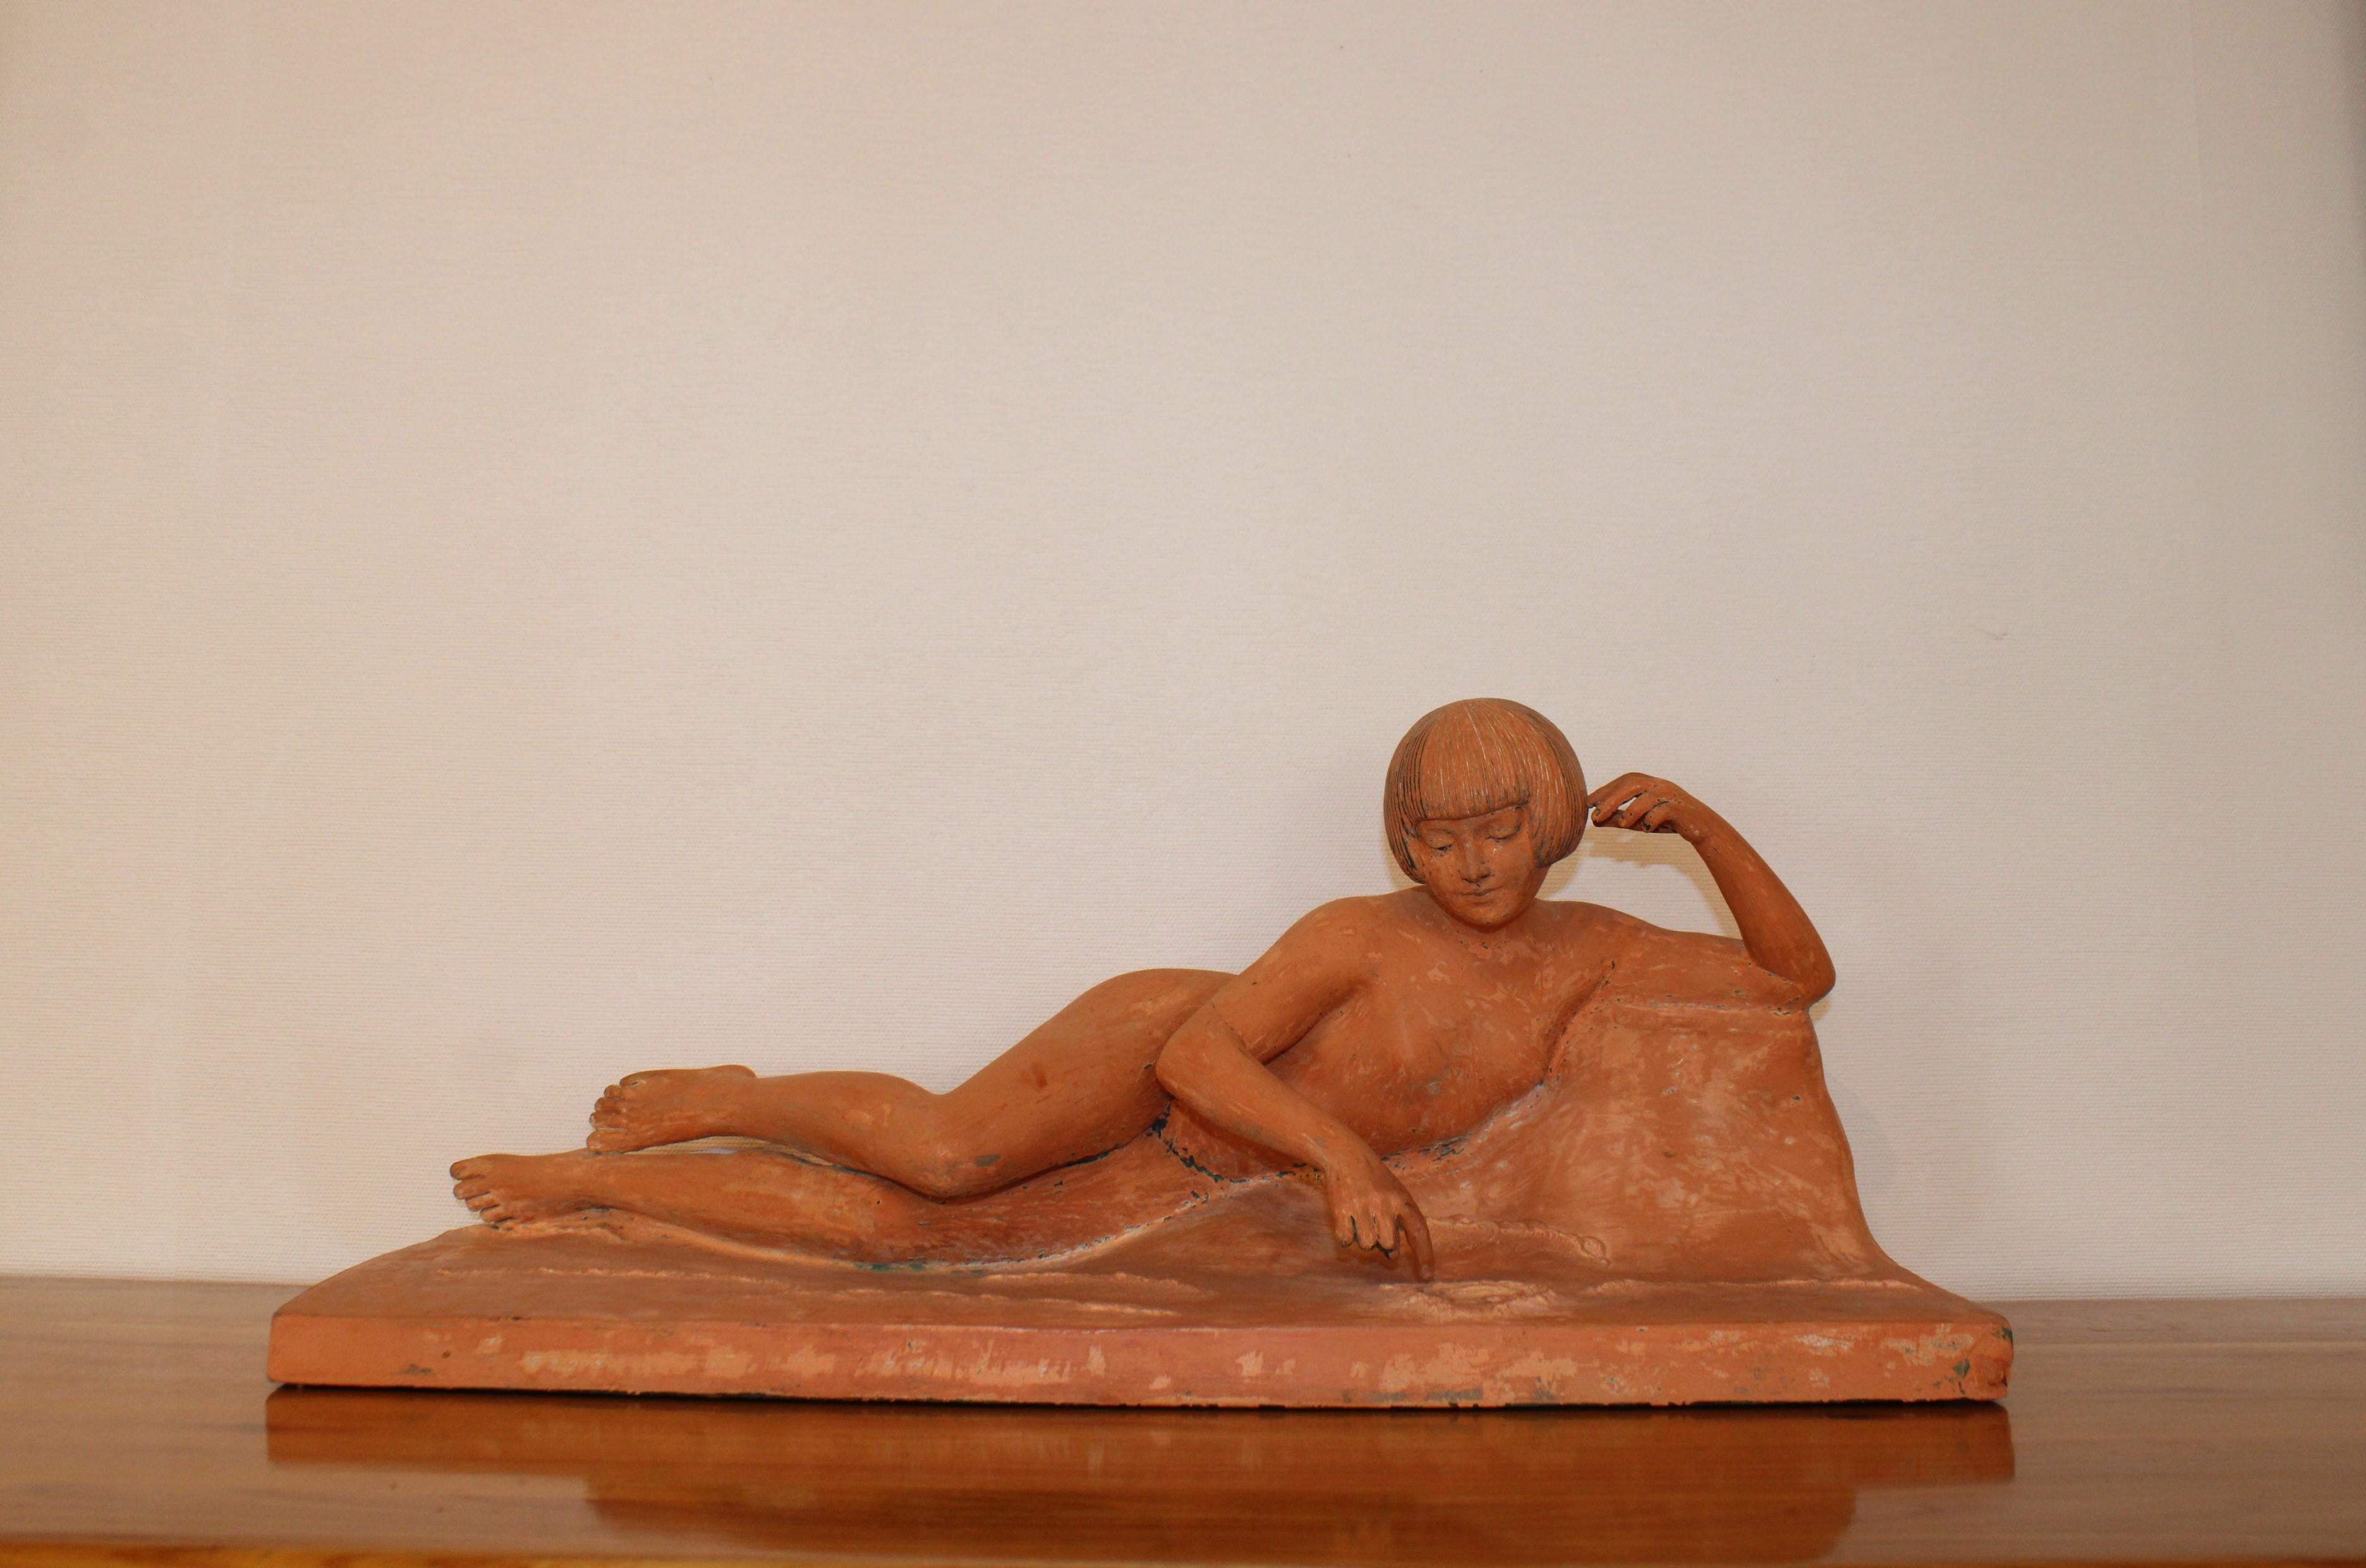 Clay sculpture representing a woman, by Georges Maxim.
Signed Geo Maxim on the left side.
First half of the 20th century, France.